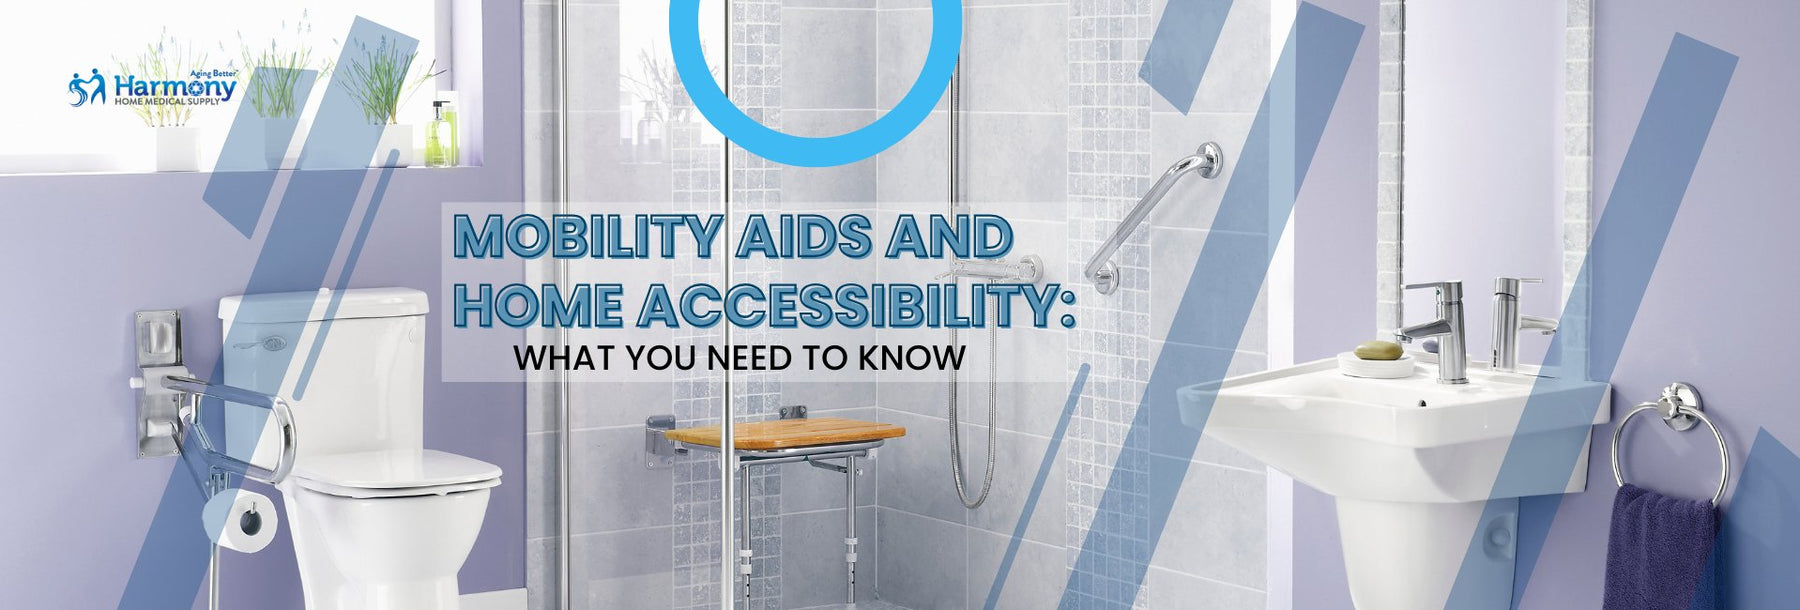 Mobility Aids and Home Accessibility: What You Need To Know - Harmony Home Medical Supply